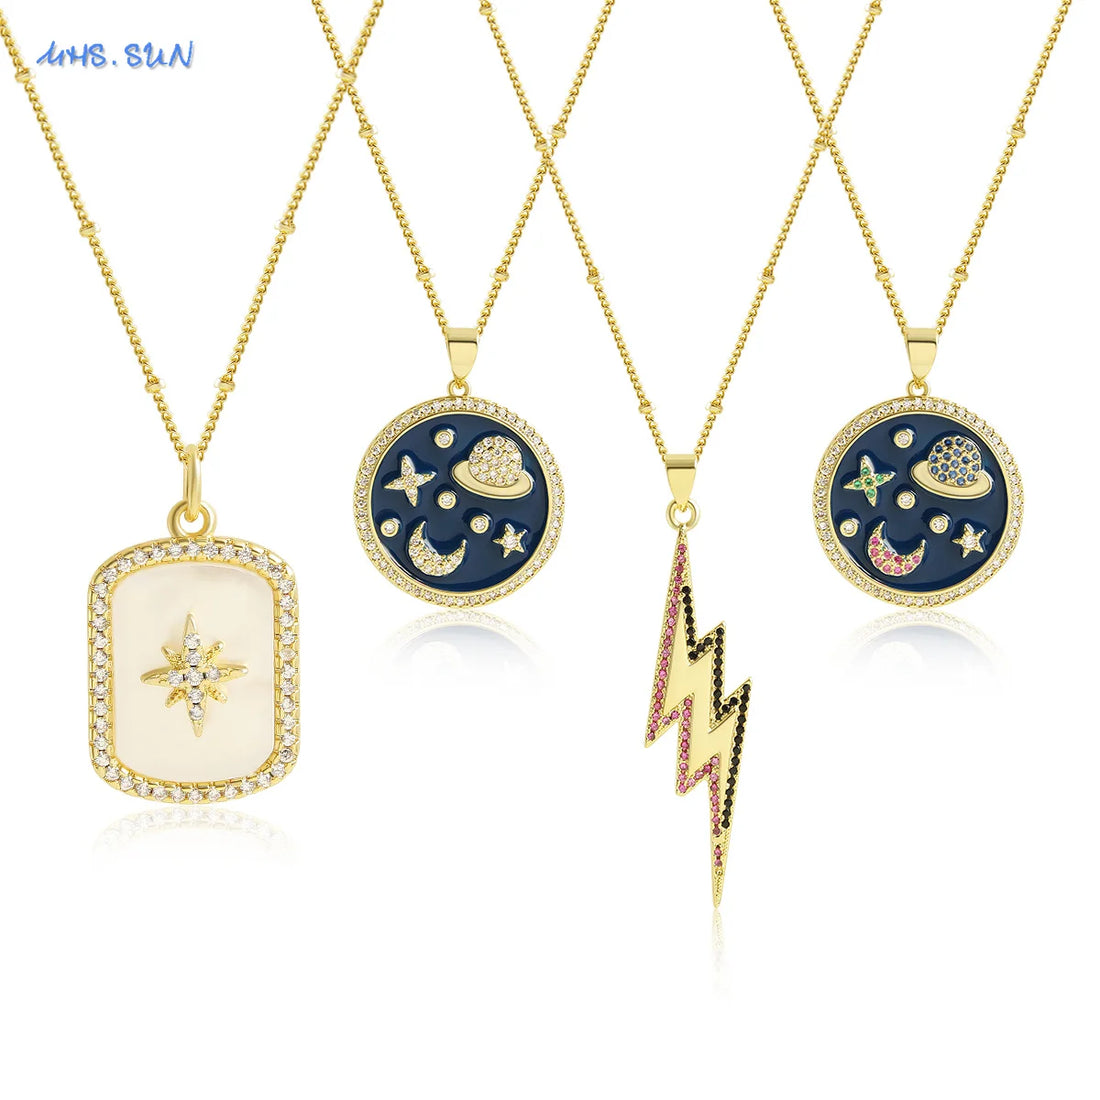 MHS.SUN Colorful Oil Drop Moon Star Lightning Pendant Necklace For Women Child Romantic Gold Color Clavicle Chain Jewelry Gift